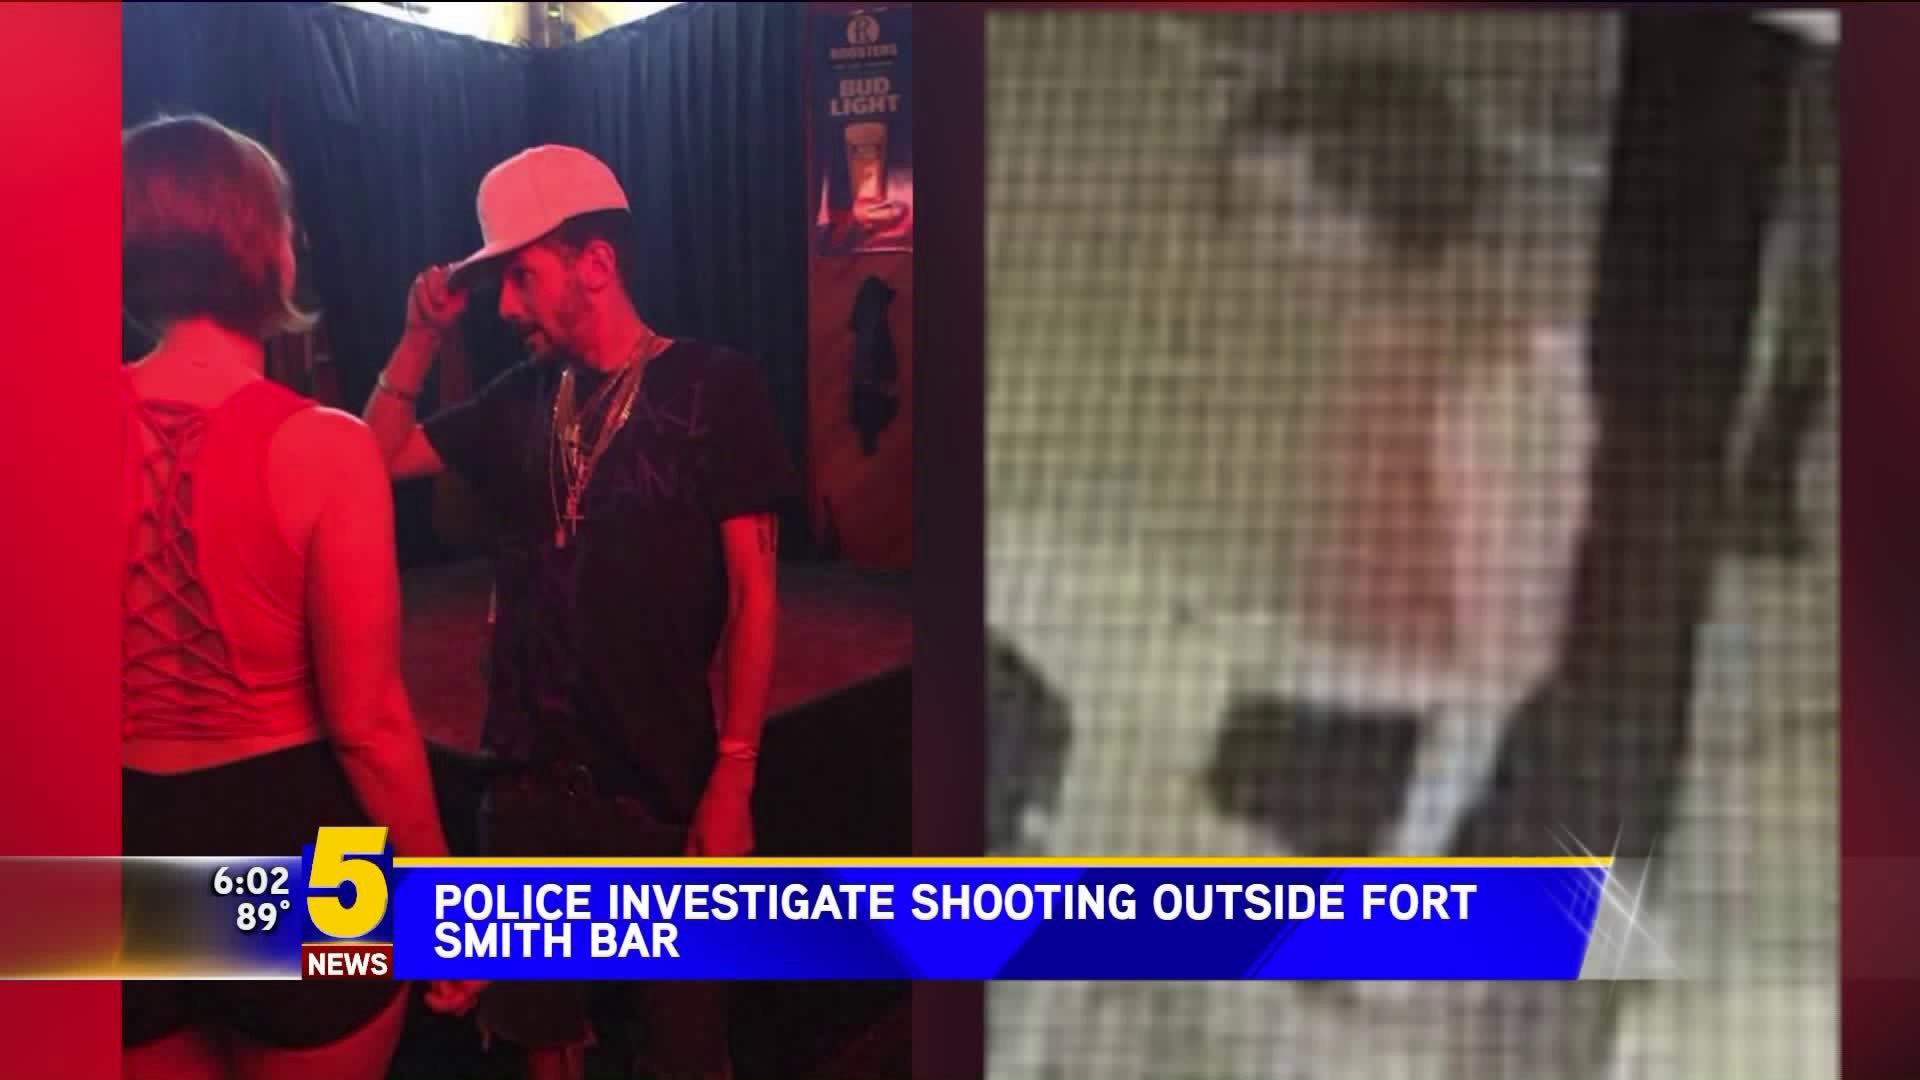 Police Investigate Shooting Outside Fort Smith Bar